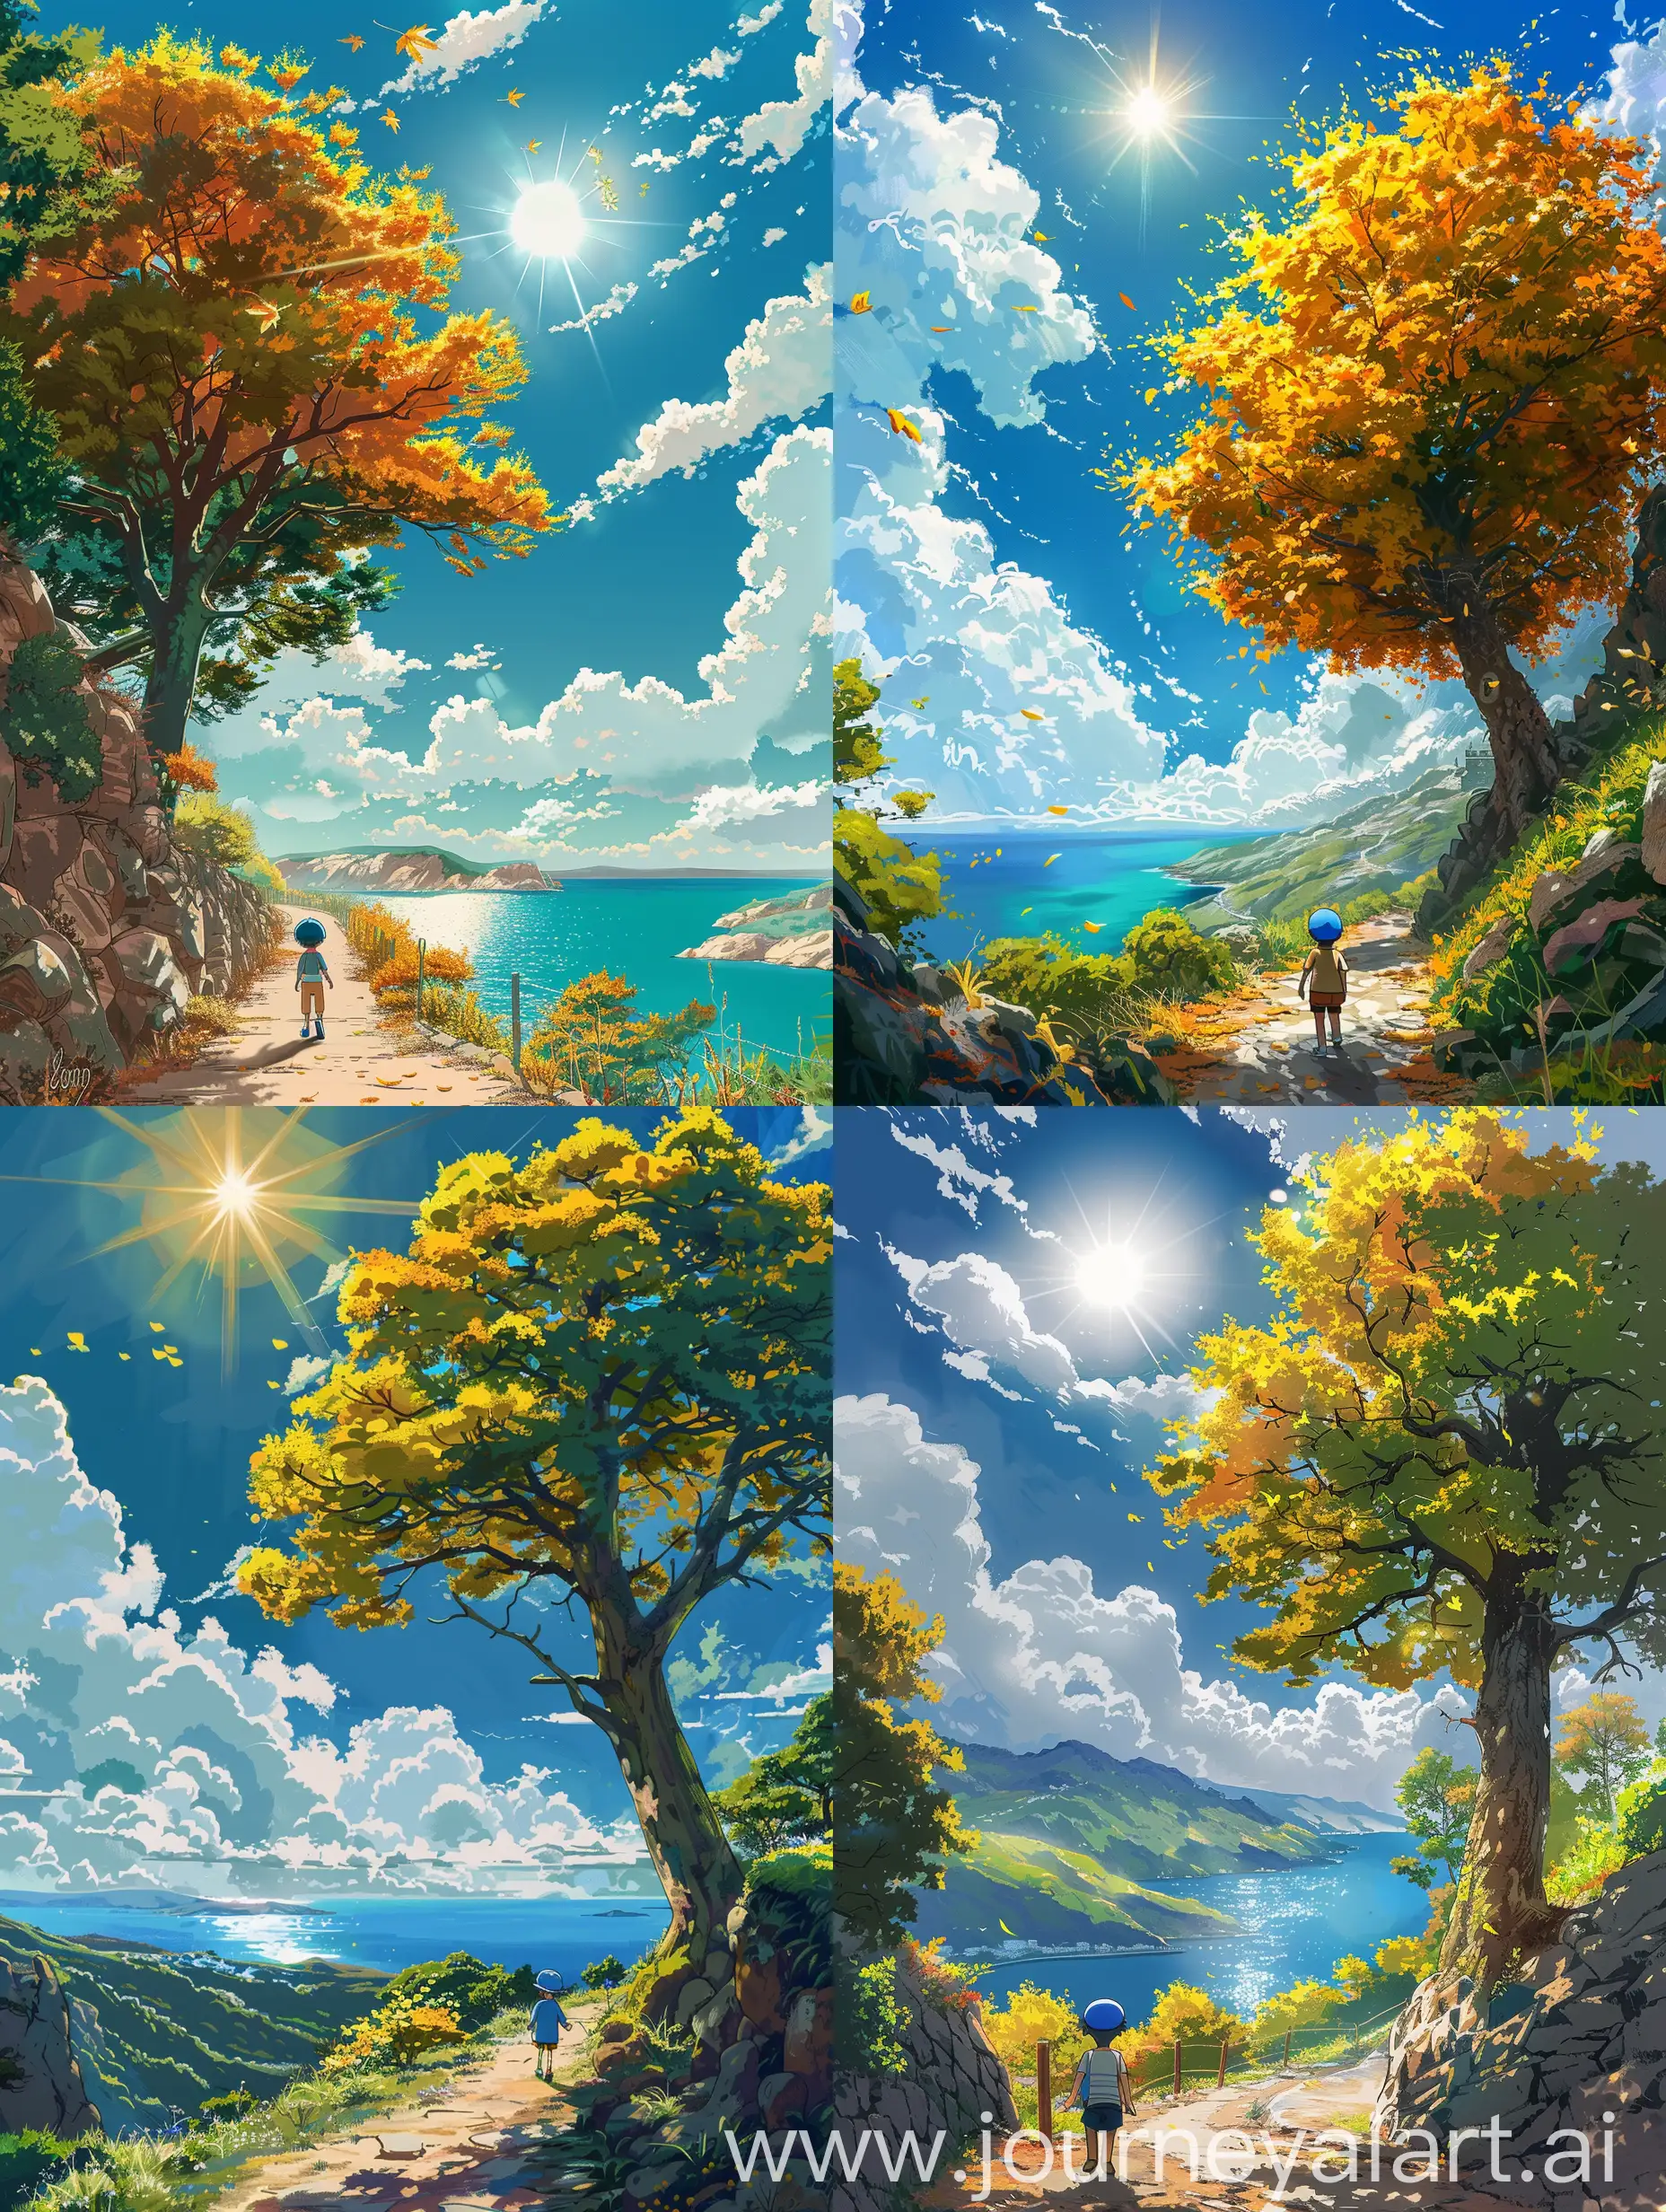 Mediterranean mountains with sea. The green color sea is only slightly visible to the right. Studio Ghibli style. Distant View ,blue sky, fluffy white clouds,pathway,Huge tree with a yellow leaves,bright sun,a boy walking with a blue cap